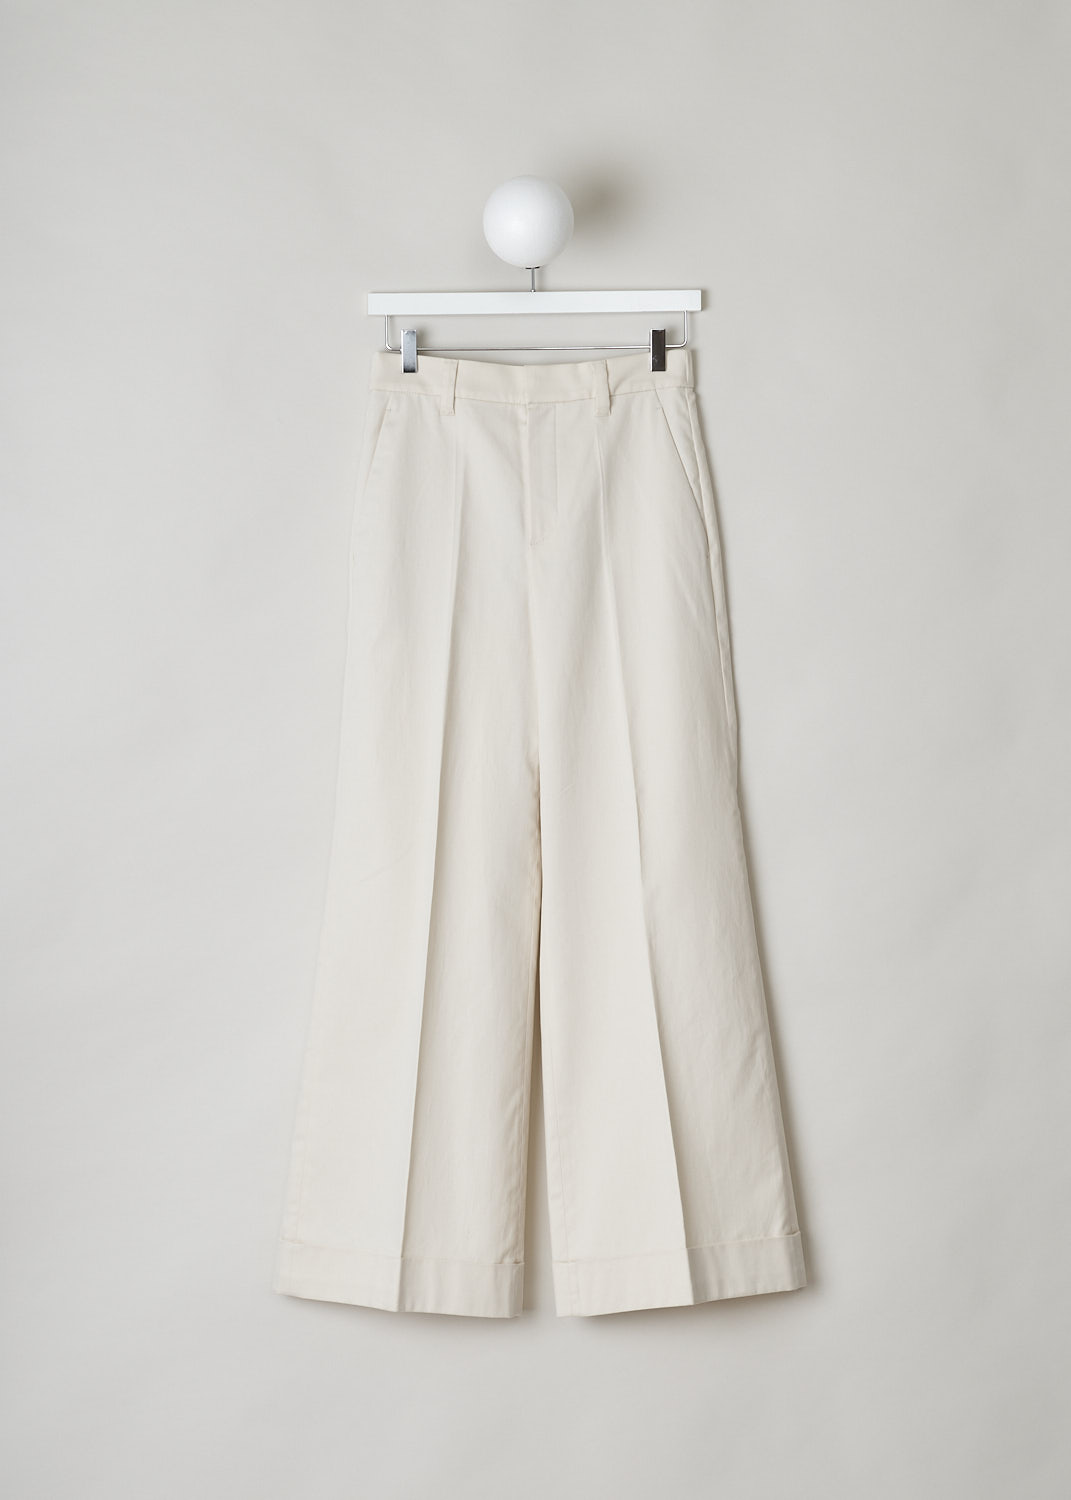 BRUNELLO CUCINELLI, BEIGE WIDE-LEG PANTS, MA130P7008_C7365, Beige, White, Front, These beige pants have straight wider pant legs with a folded hem. The pant legs have pressed centre creases. The waistline has belt loops and is elasticated in the back. The closure option is a concealed hook and zipper. The pants have forward slanted pockets in the front and welt pockets in the back. 


